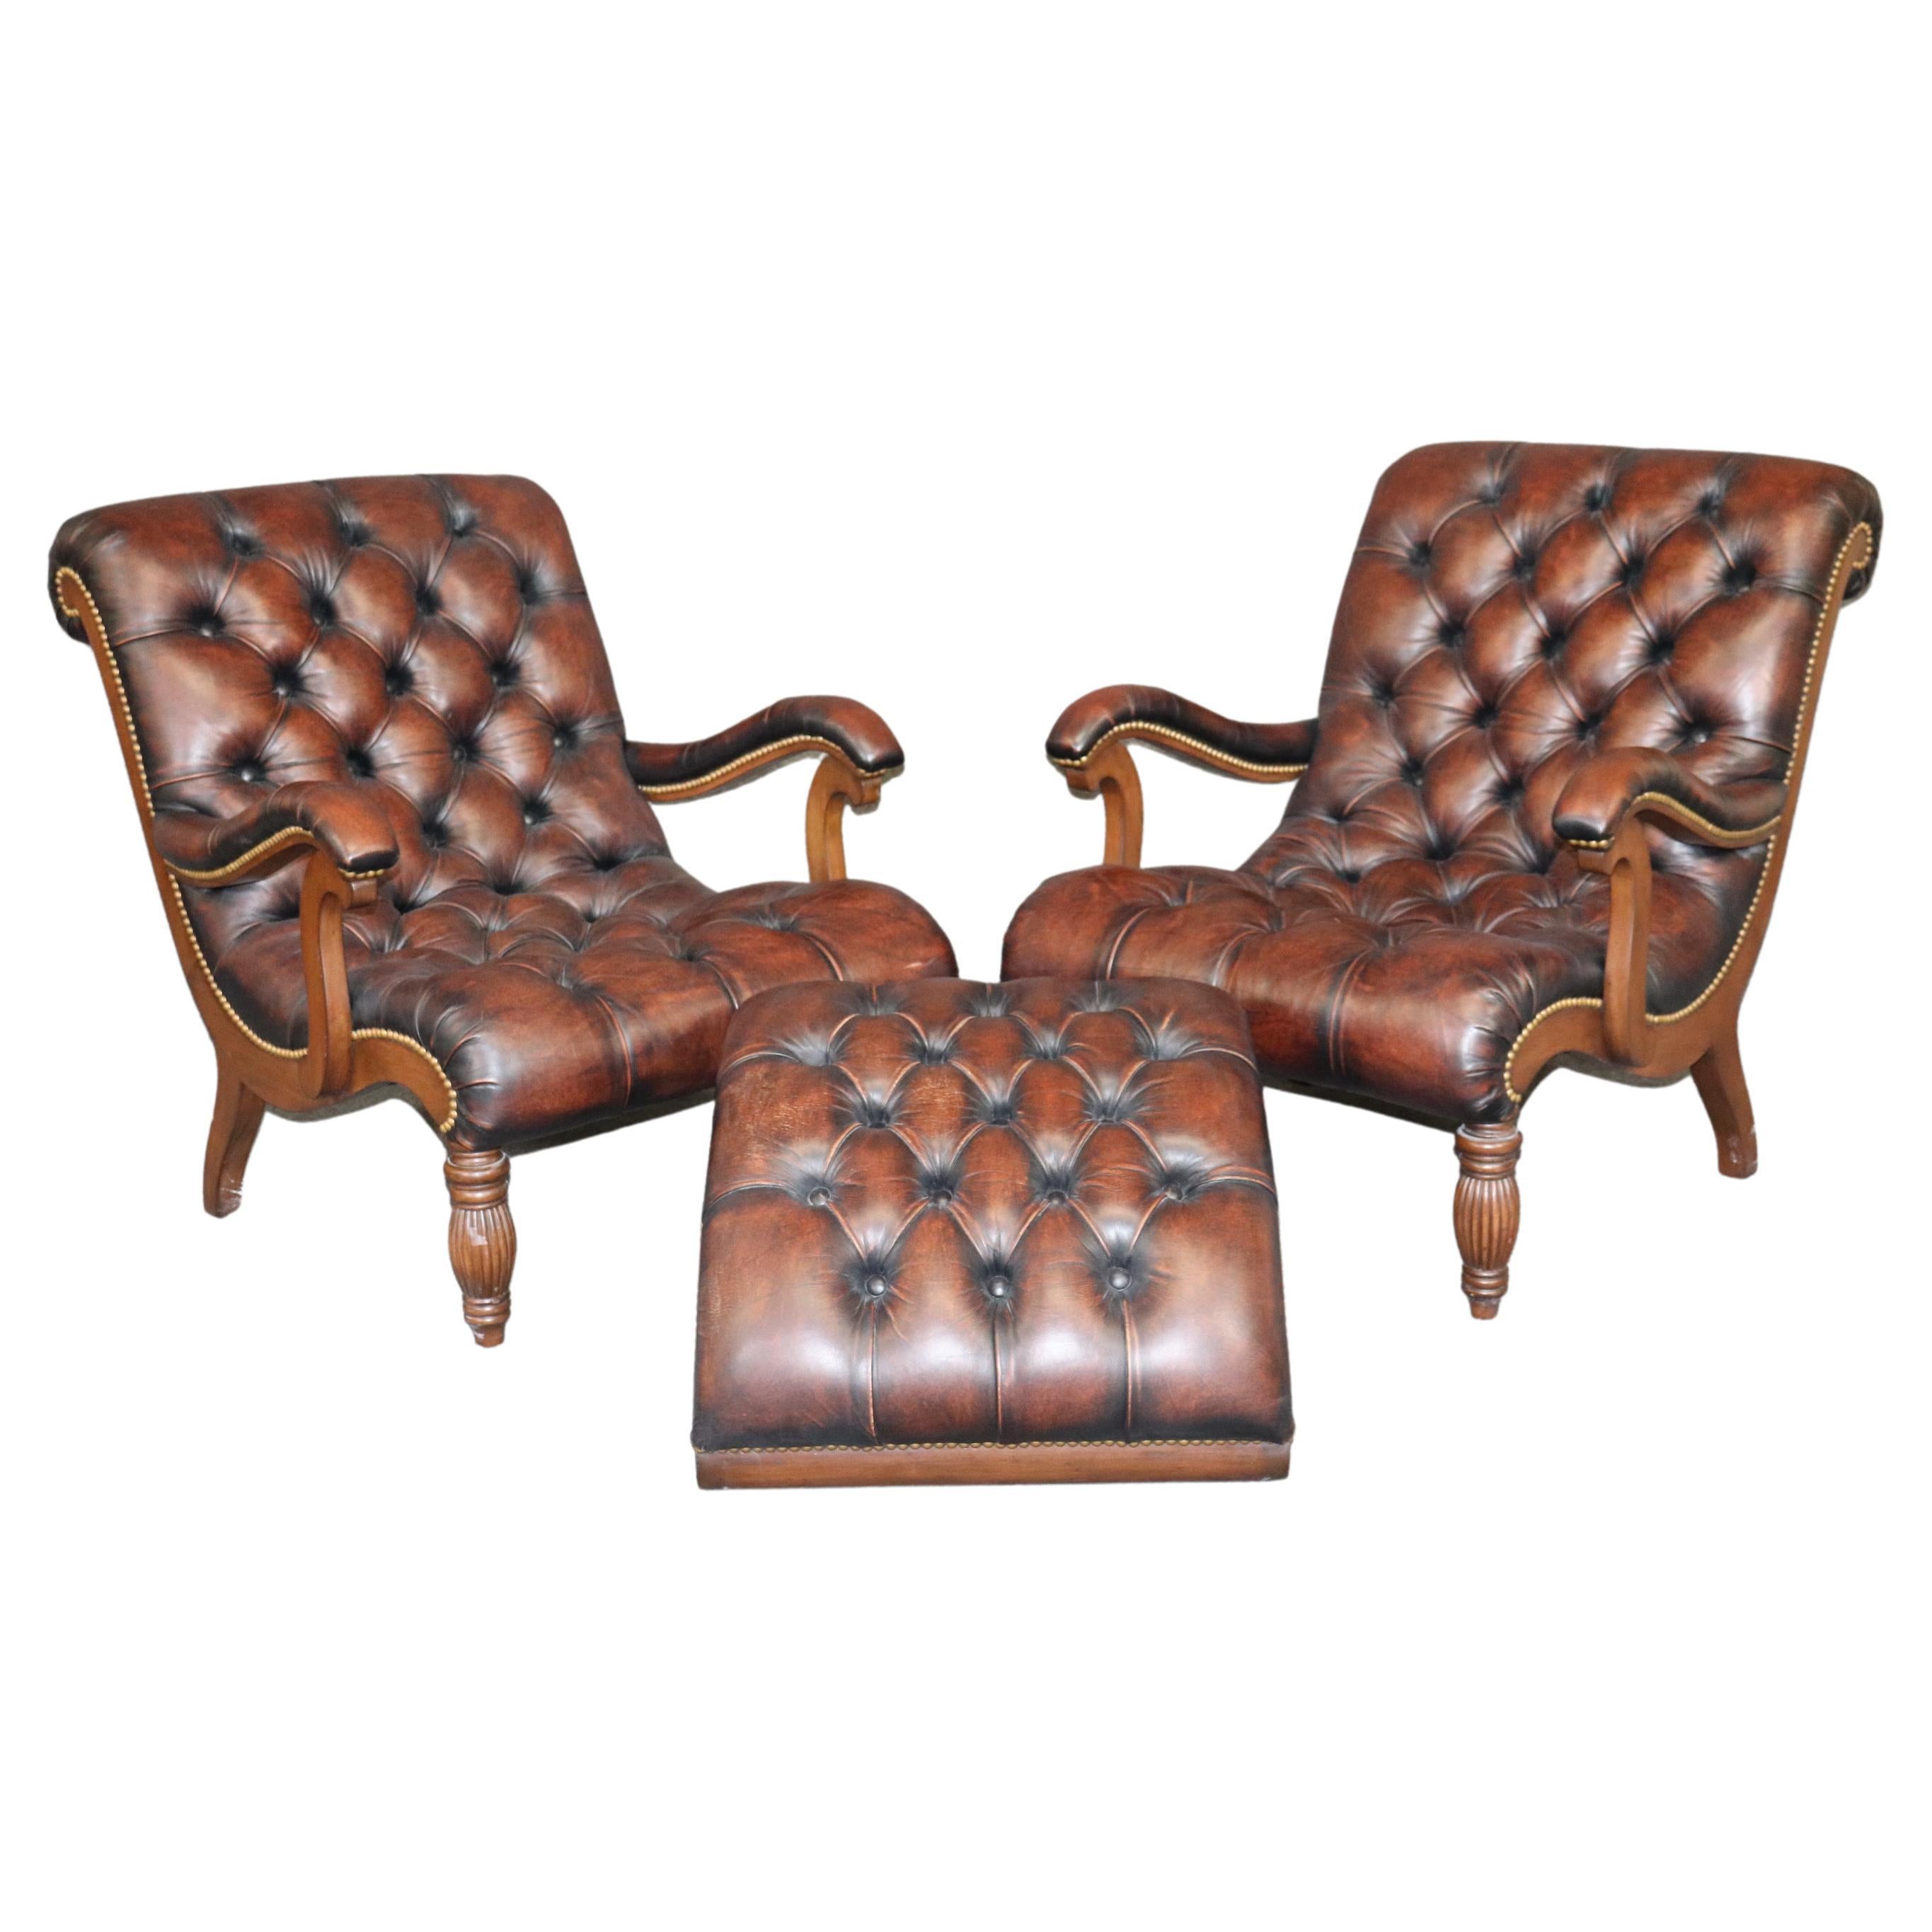 Pair of Brown Antiqued Leather Plantation or Campeche Chairs with Ottoman 